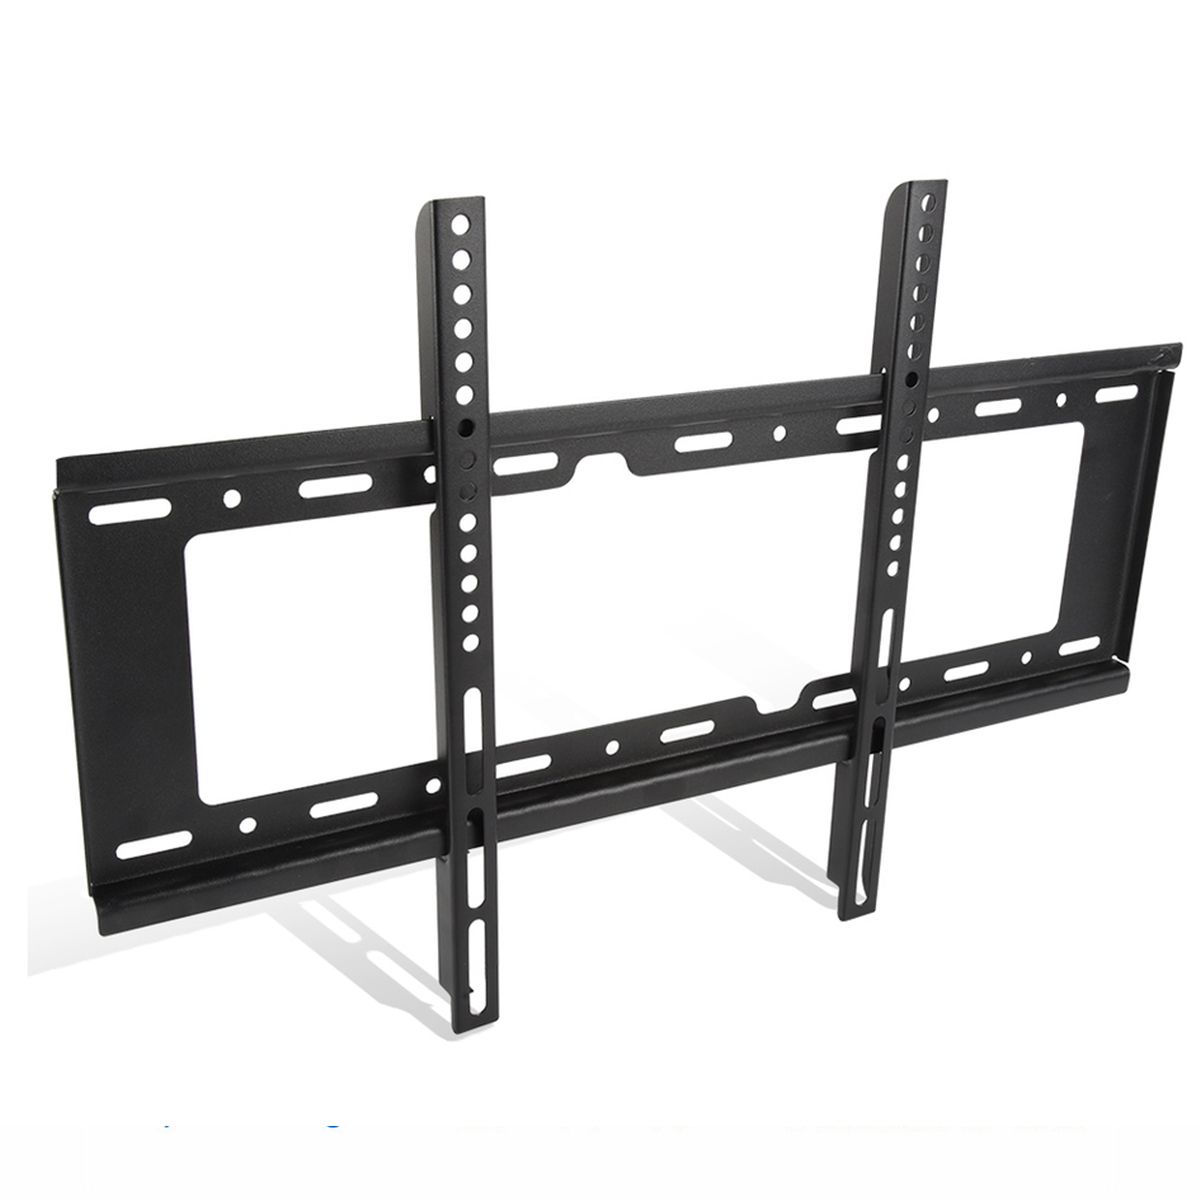 Support TV fixe, fixation mural pour TV OLED Sony XR55A80L 55" VESA 200X400mm Noir-Visiodirect